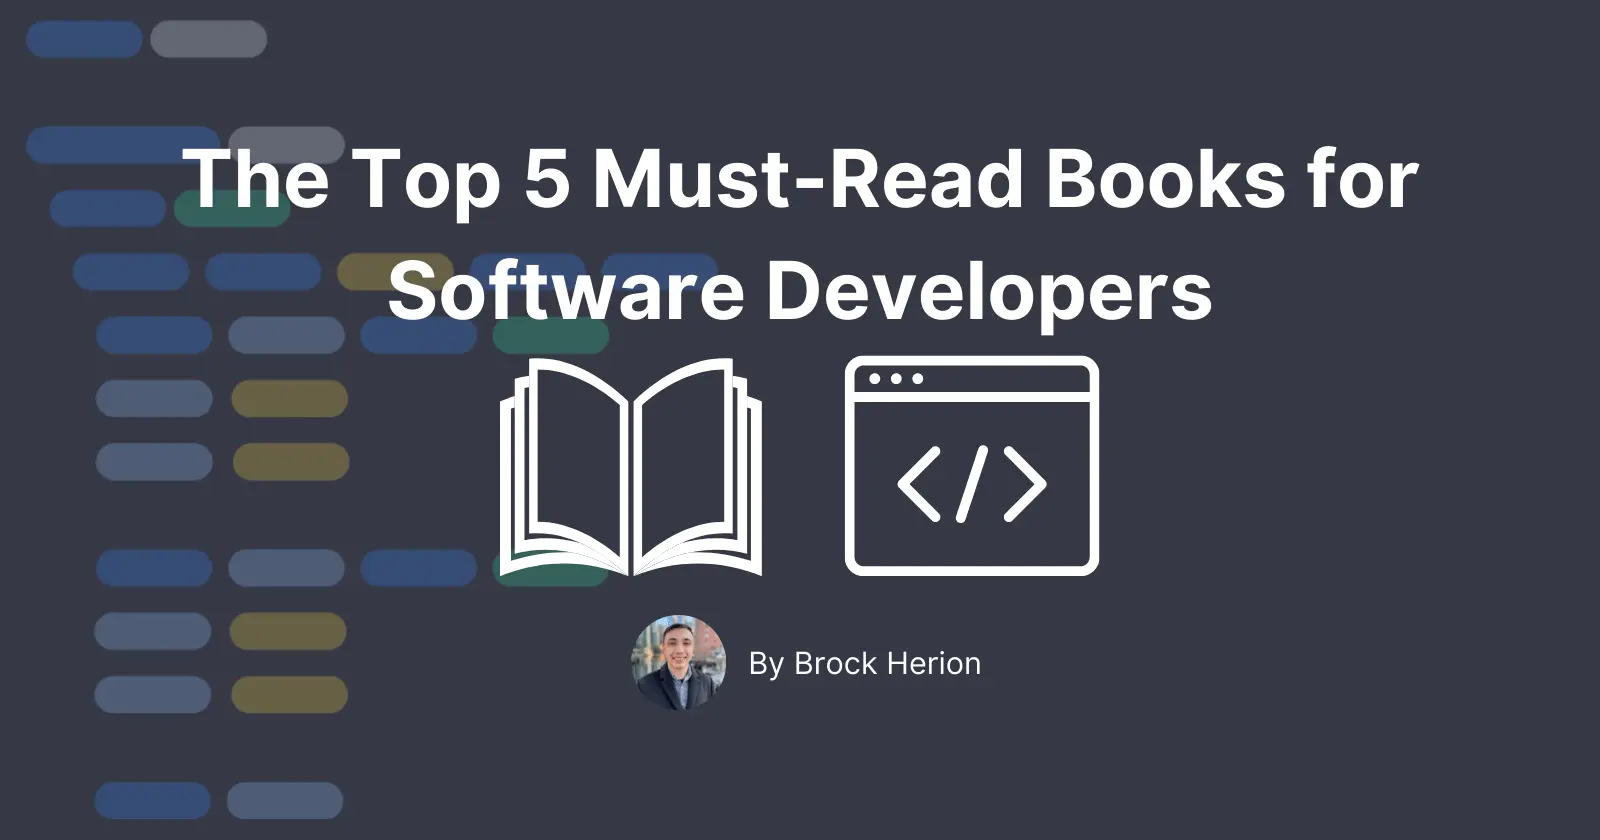 The Top 5 Must-Read Books for Software Developers